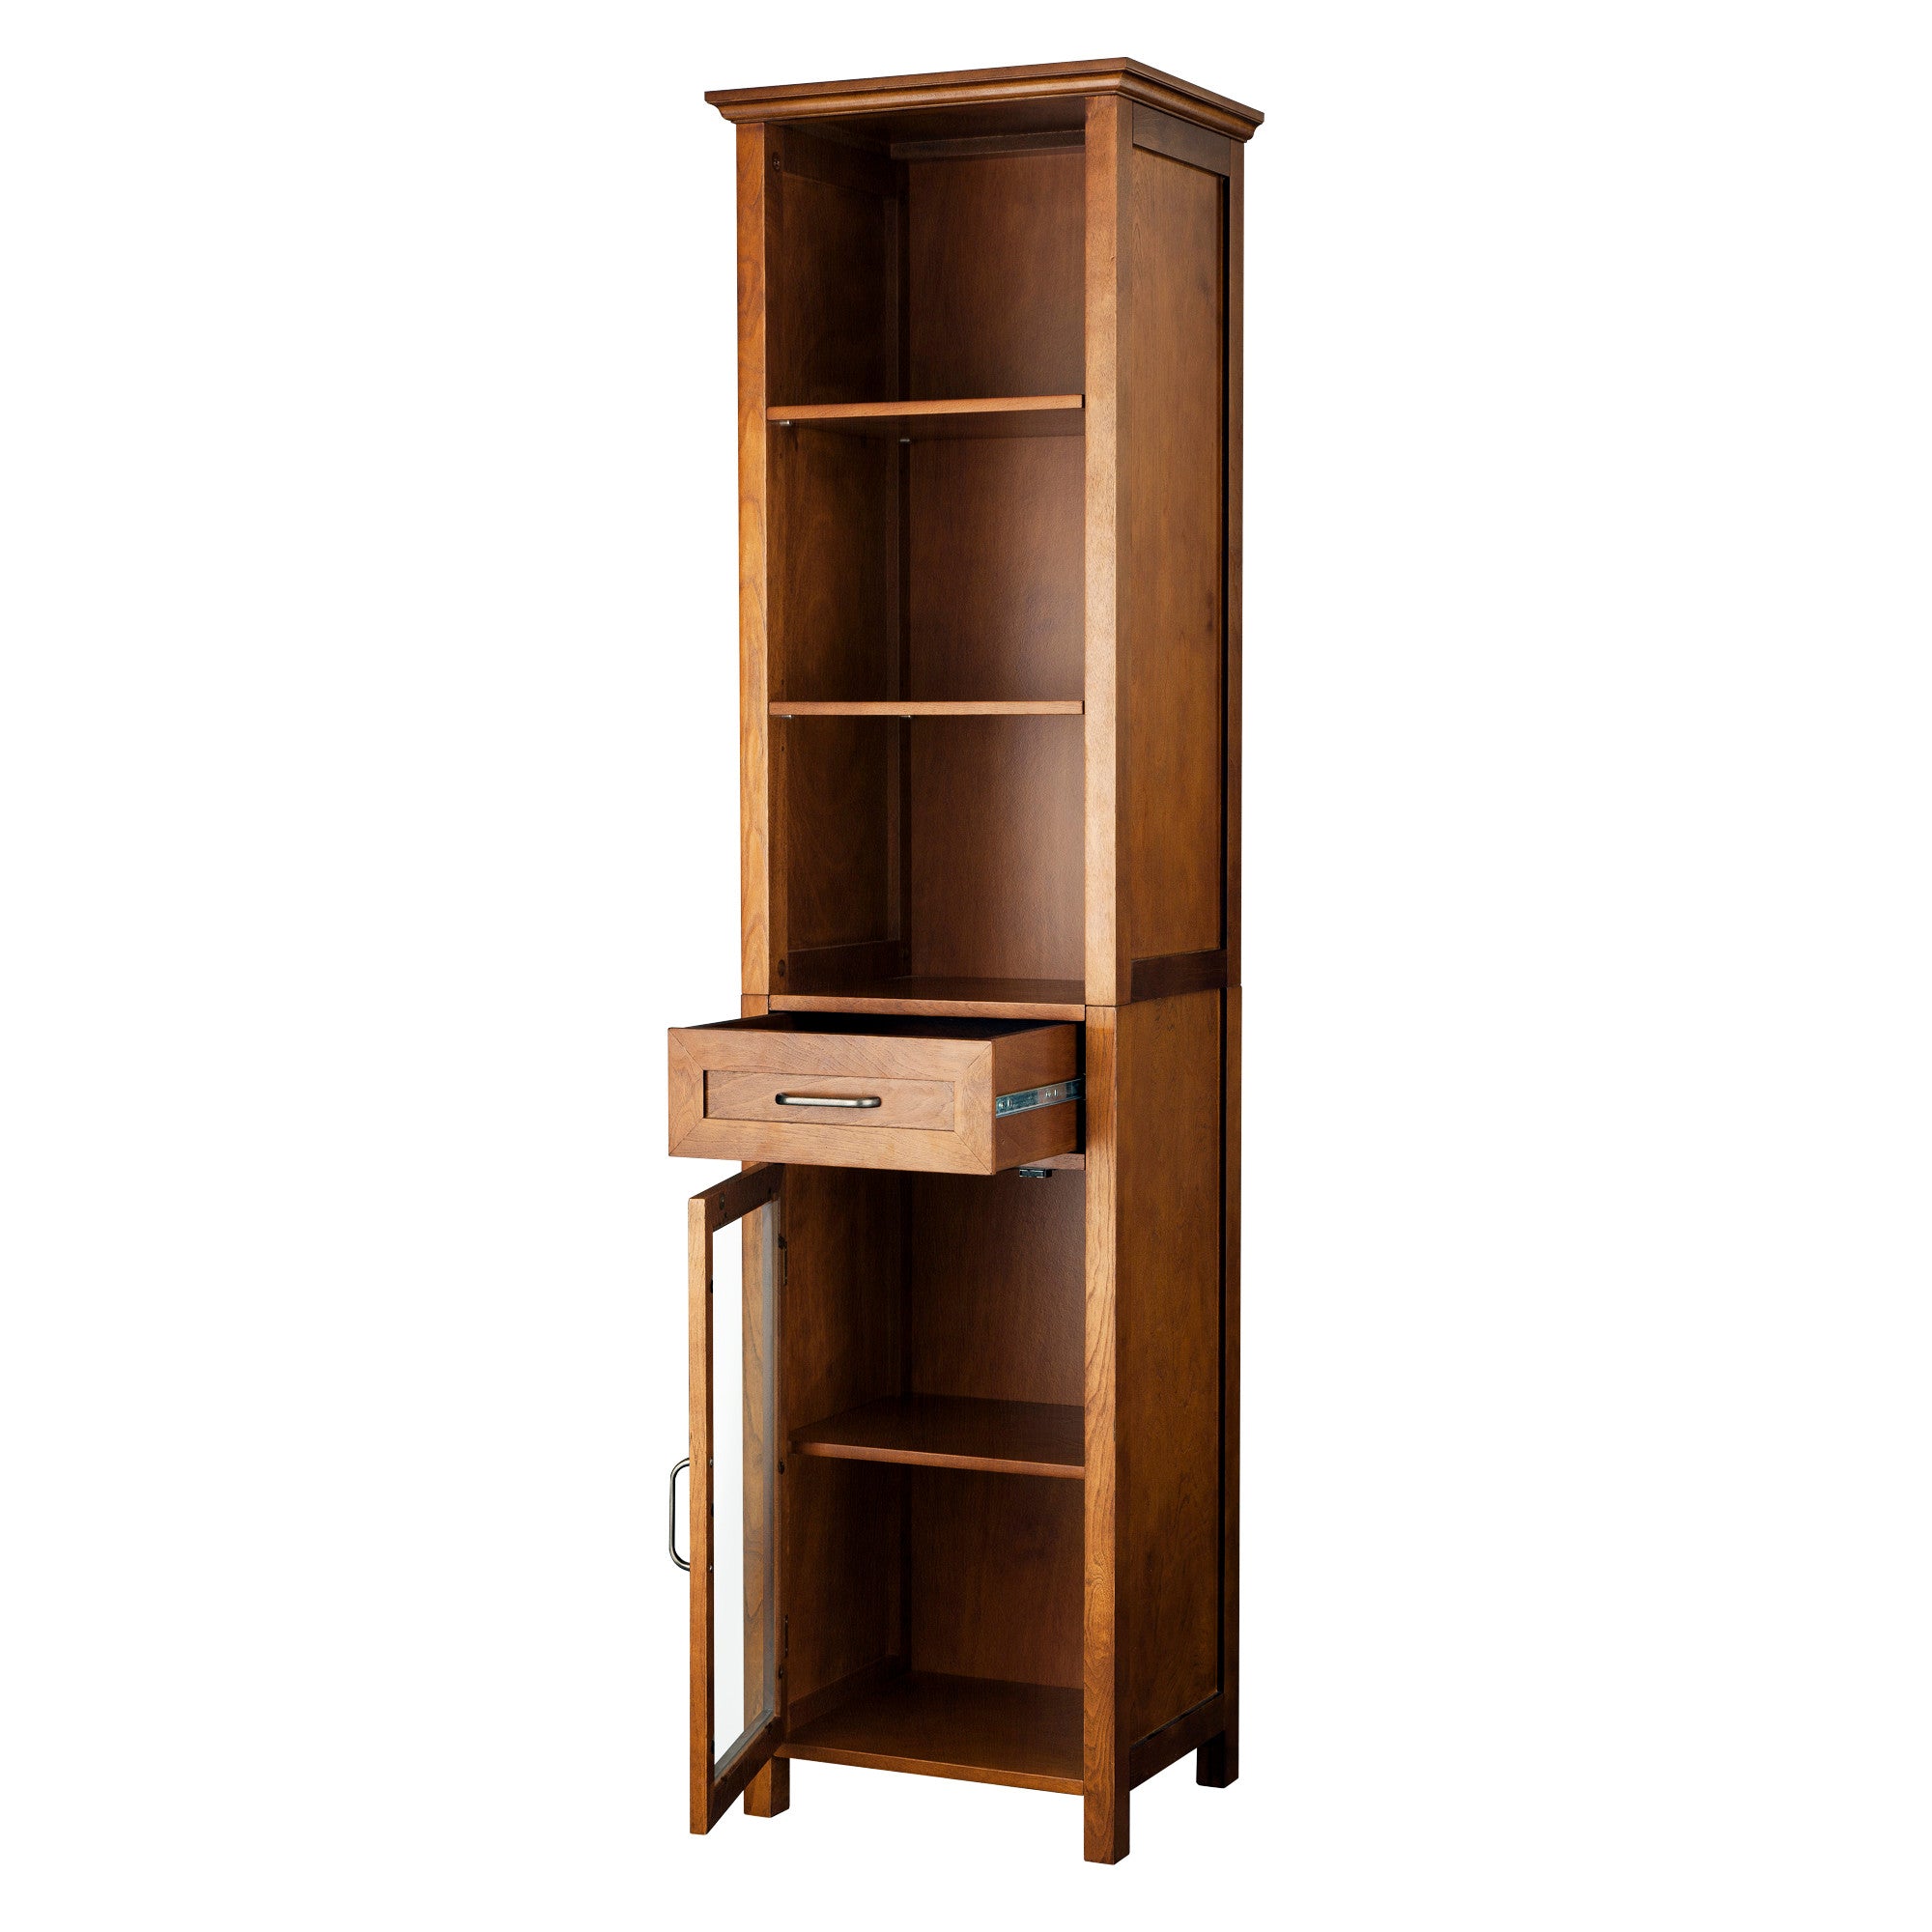 Teamson Home Oil Oak Finish Bathroom Linen Storage Cabinet with 1 Drawer and 3 Open Shelves, Brown